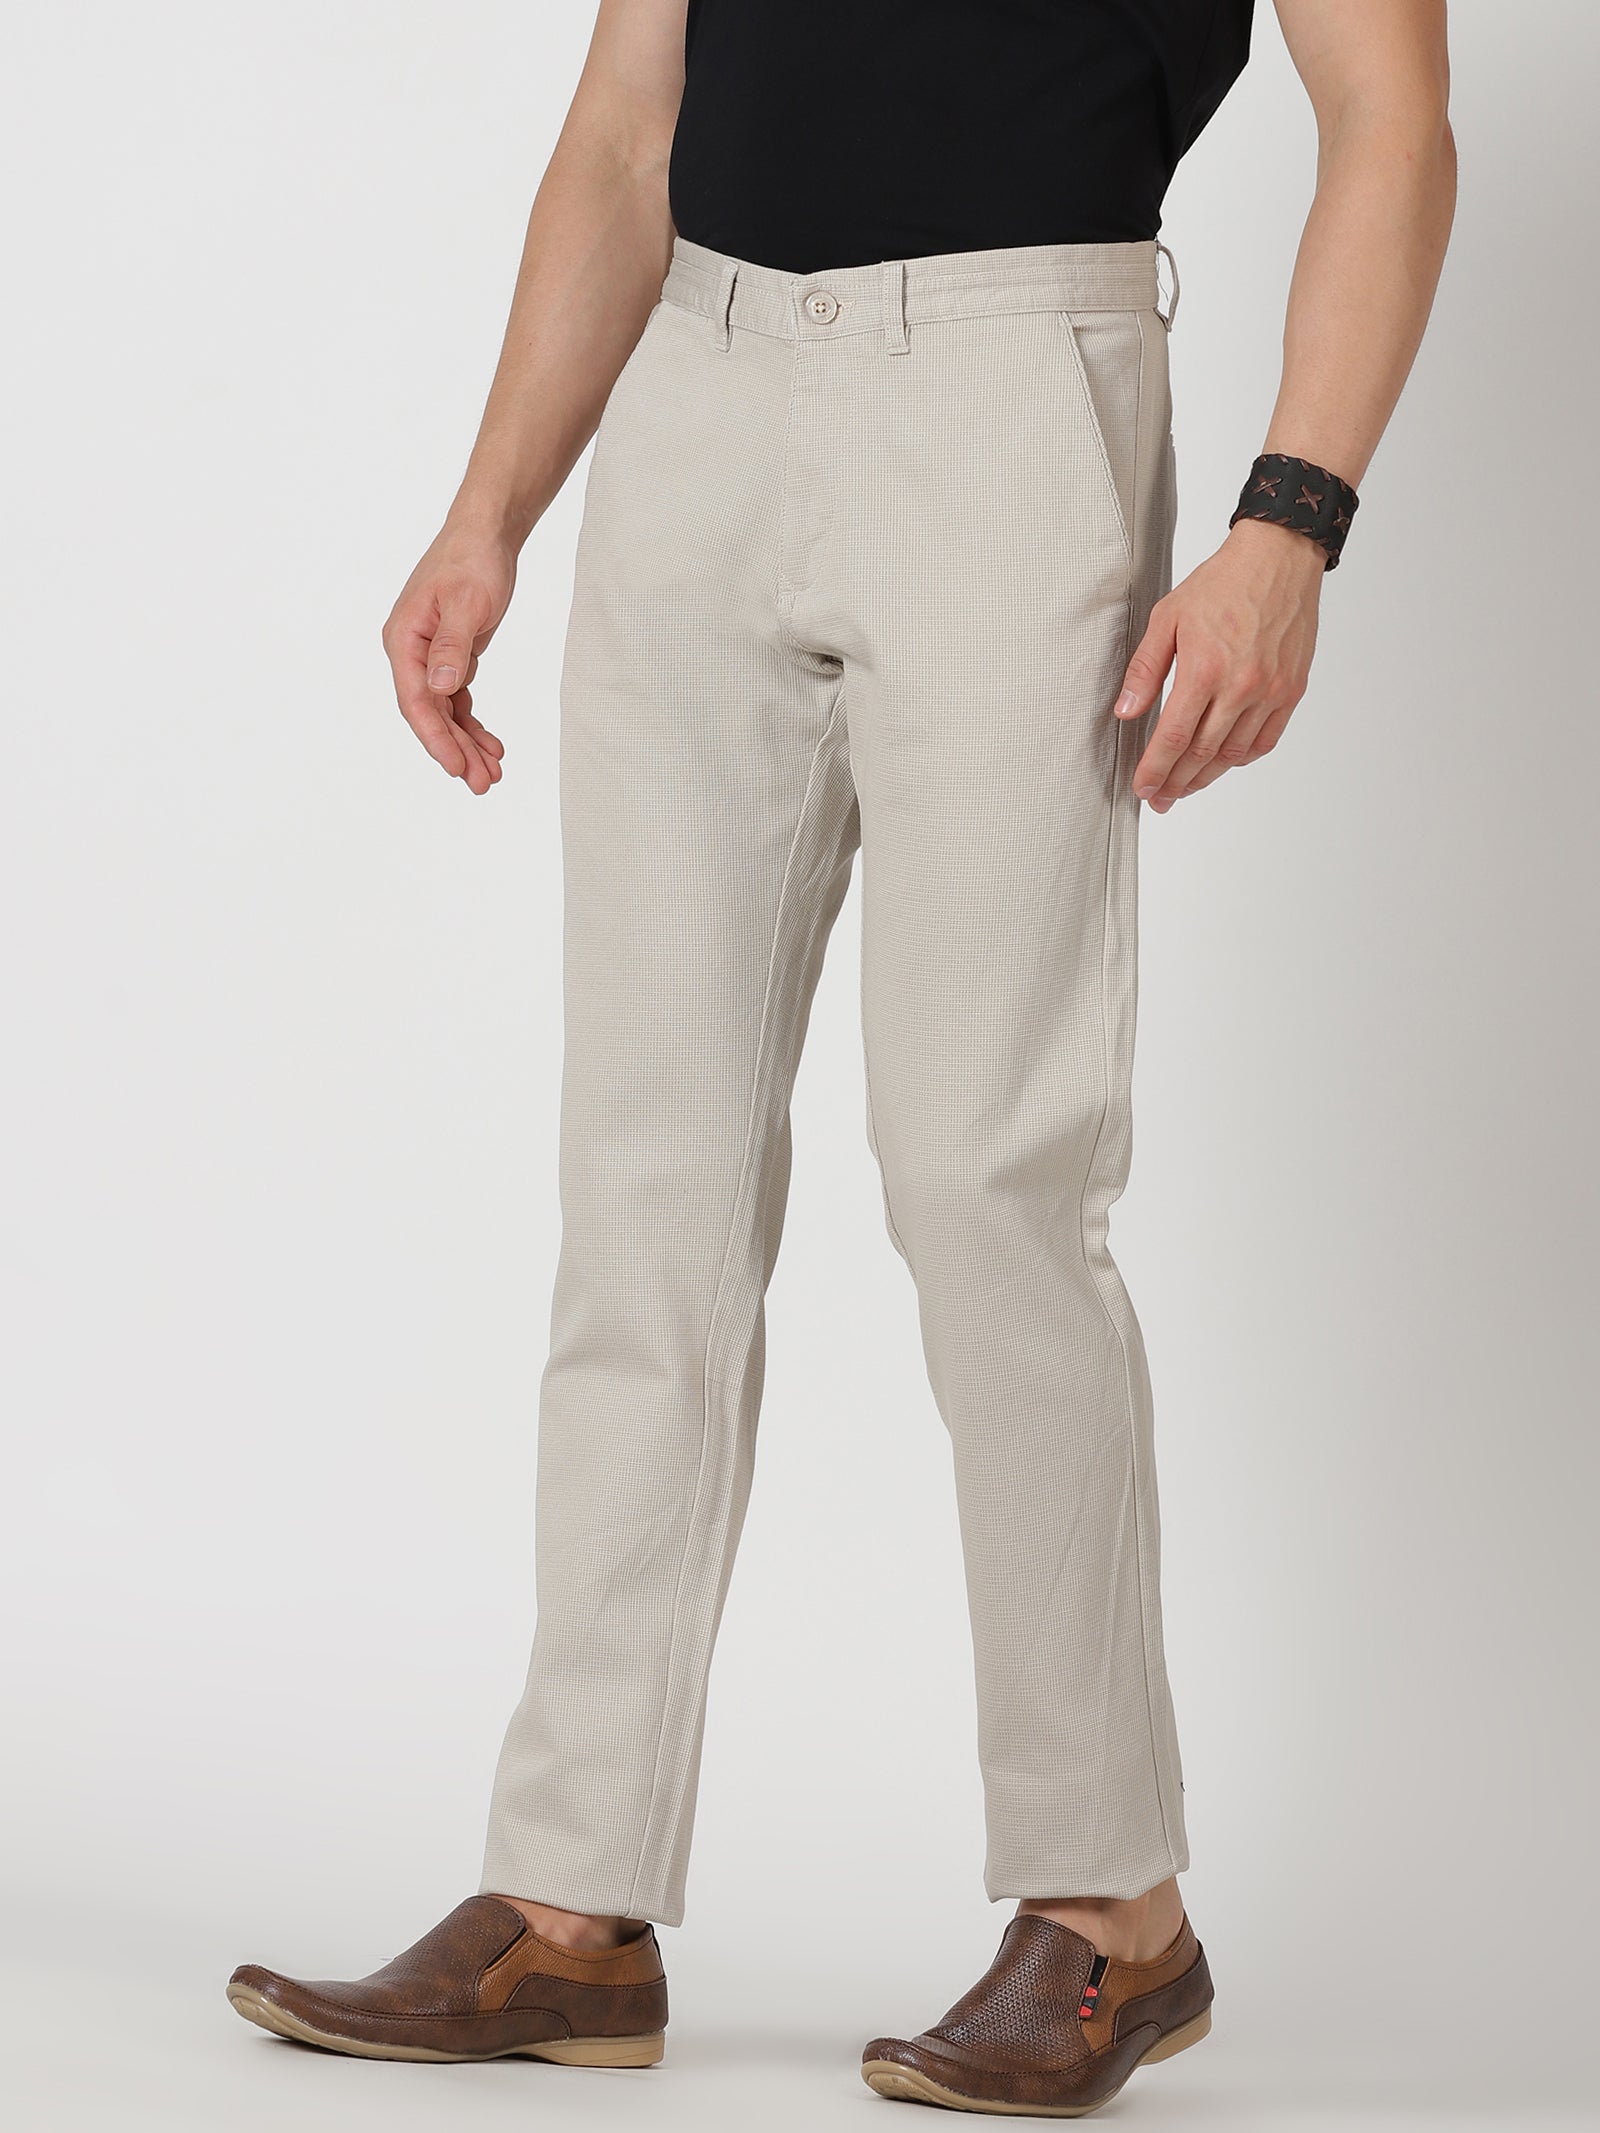 Buy Beige Trousers & Pants for Men by FIRST CLASS Online | Ajio.com